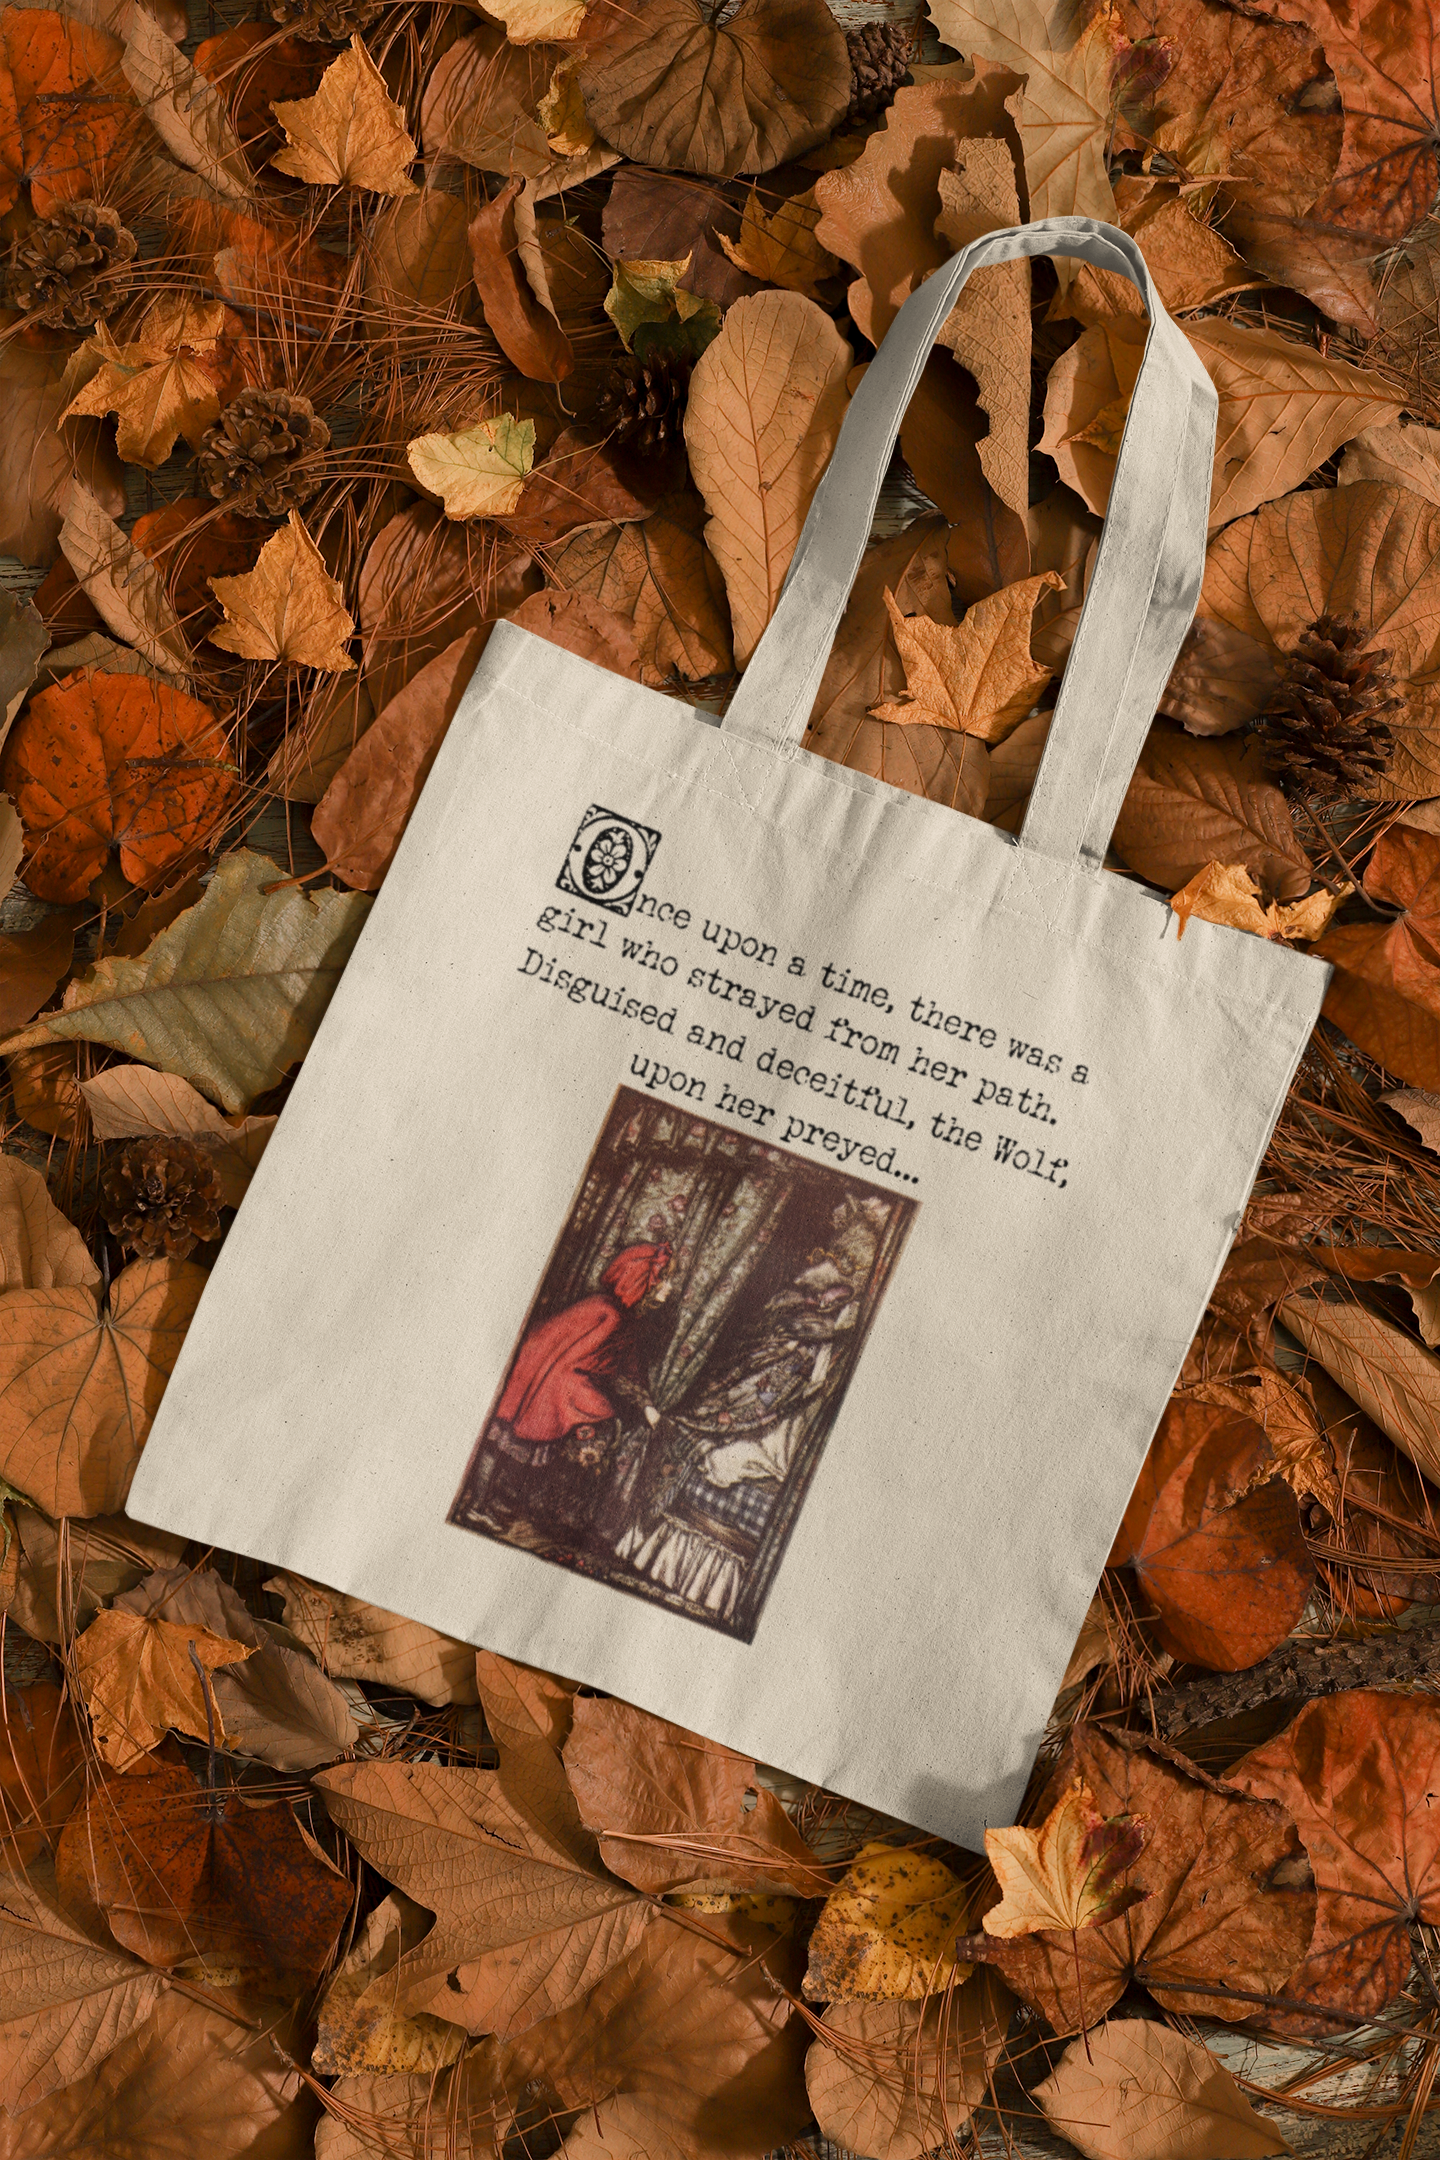 She Conquered It - Red Riding Hood Classic Fairytale Vintage Illustration Canvas Tote Bag